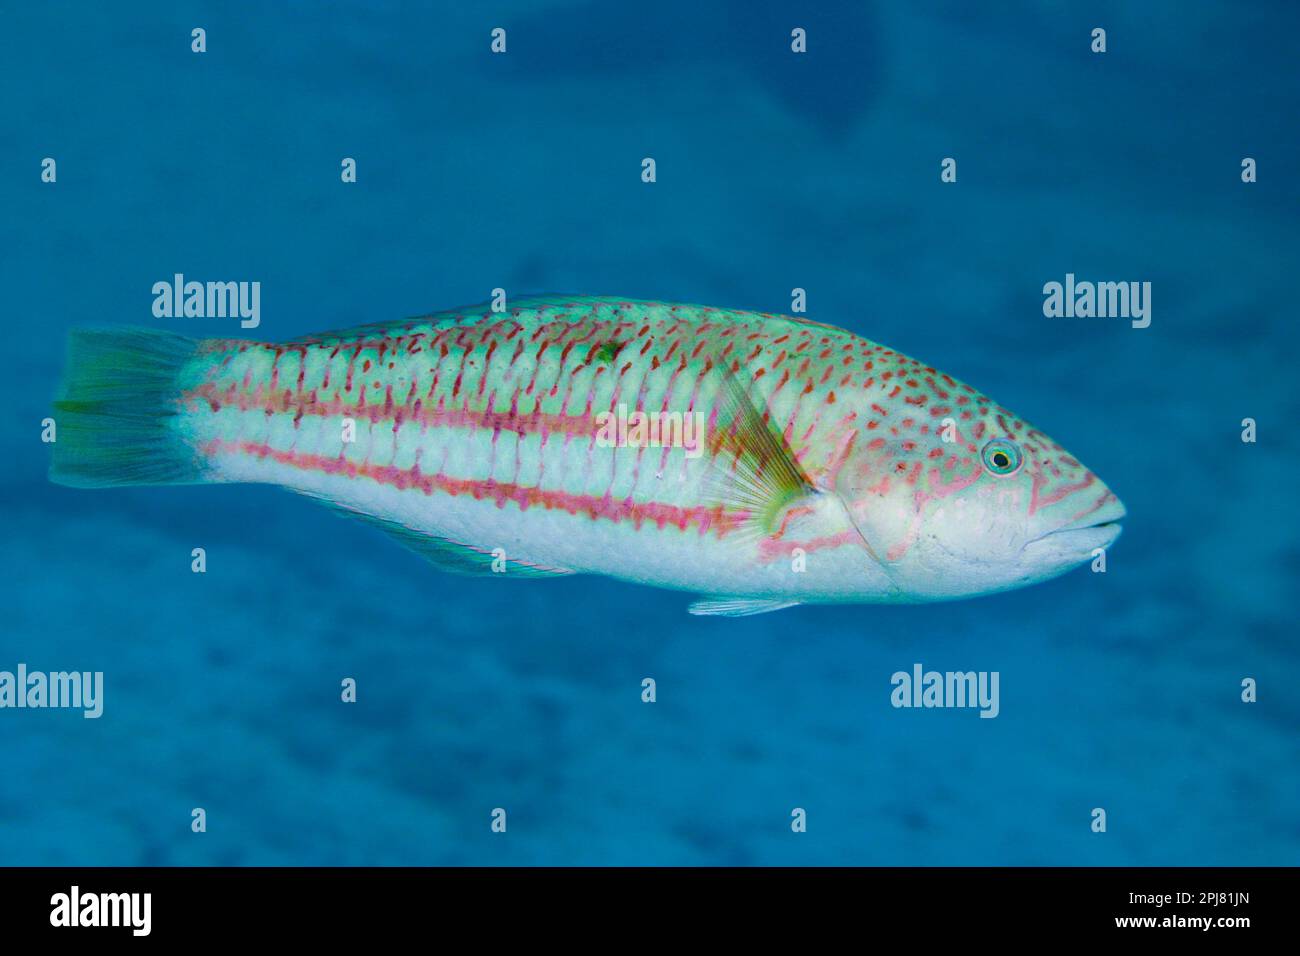 The surge wrasse, Thalassoma purpureum, is also known as the green-blocked wrasse, purple wrasse or red and green wrasse,  Rarotonga, Cook Islands, So Stock Photo